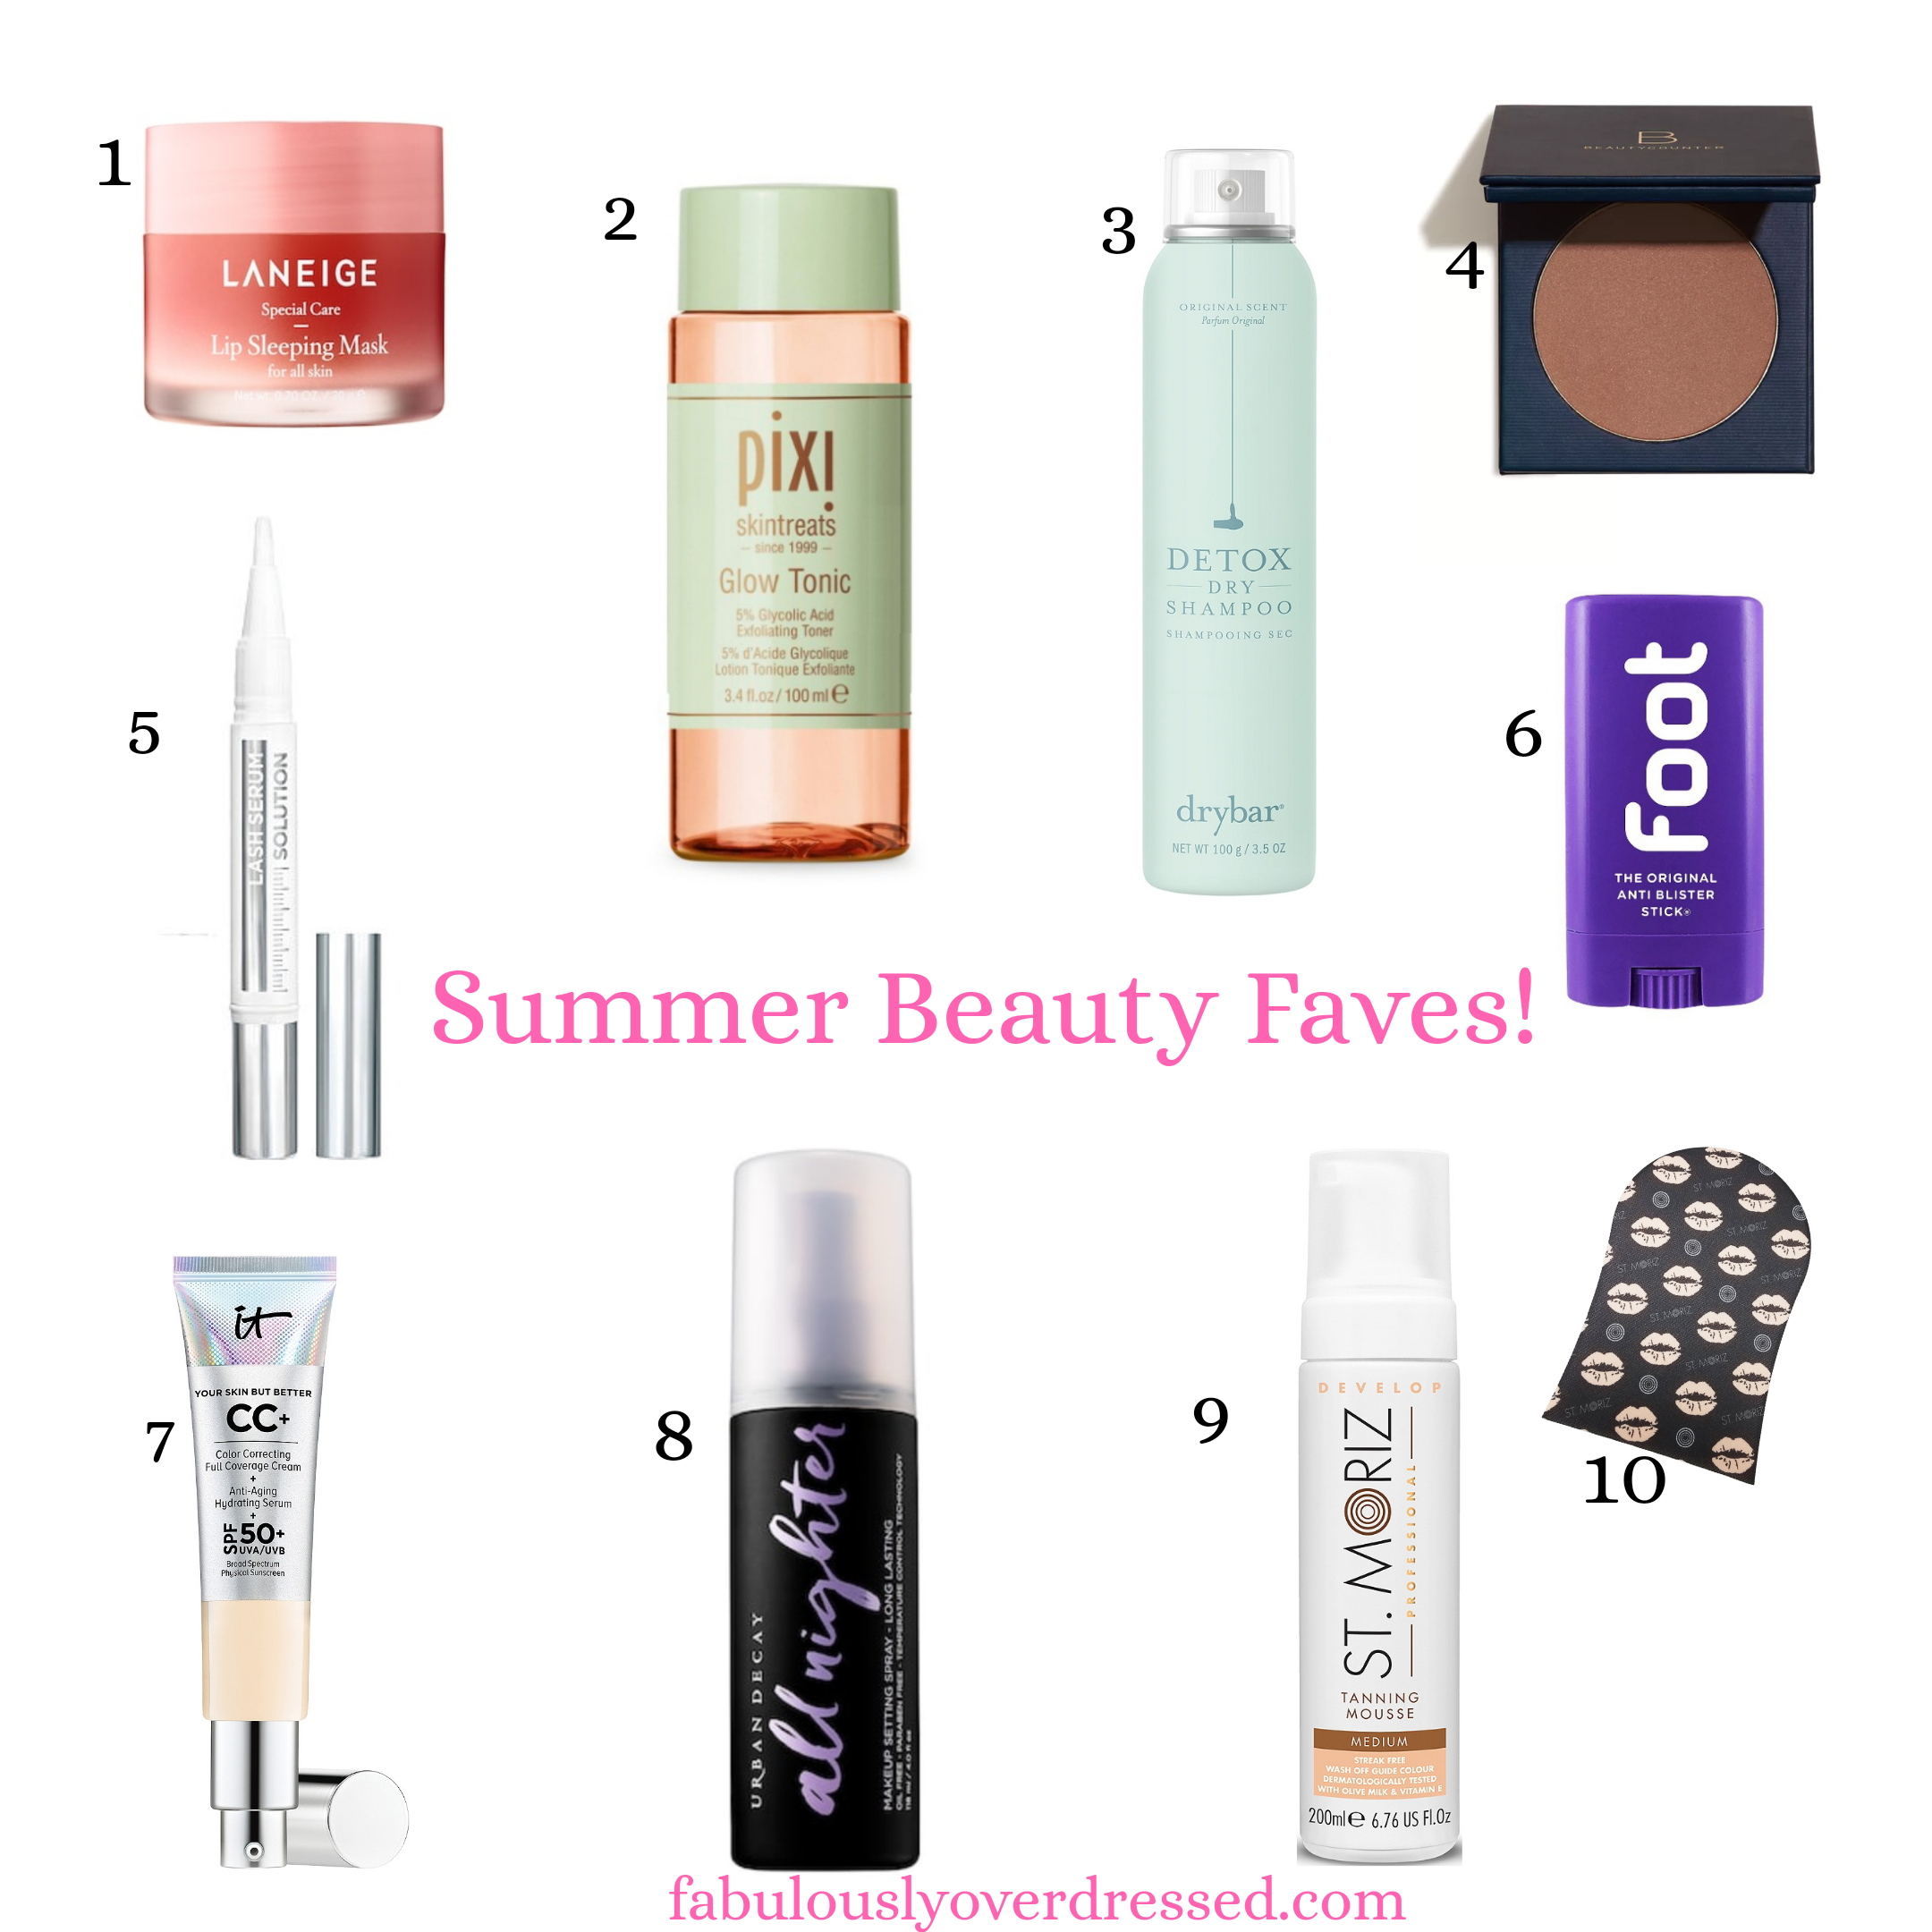 Summer Beauty Faves! - Fabulously Overdressed